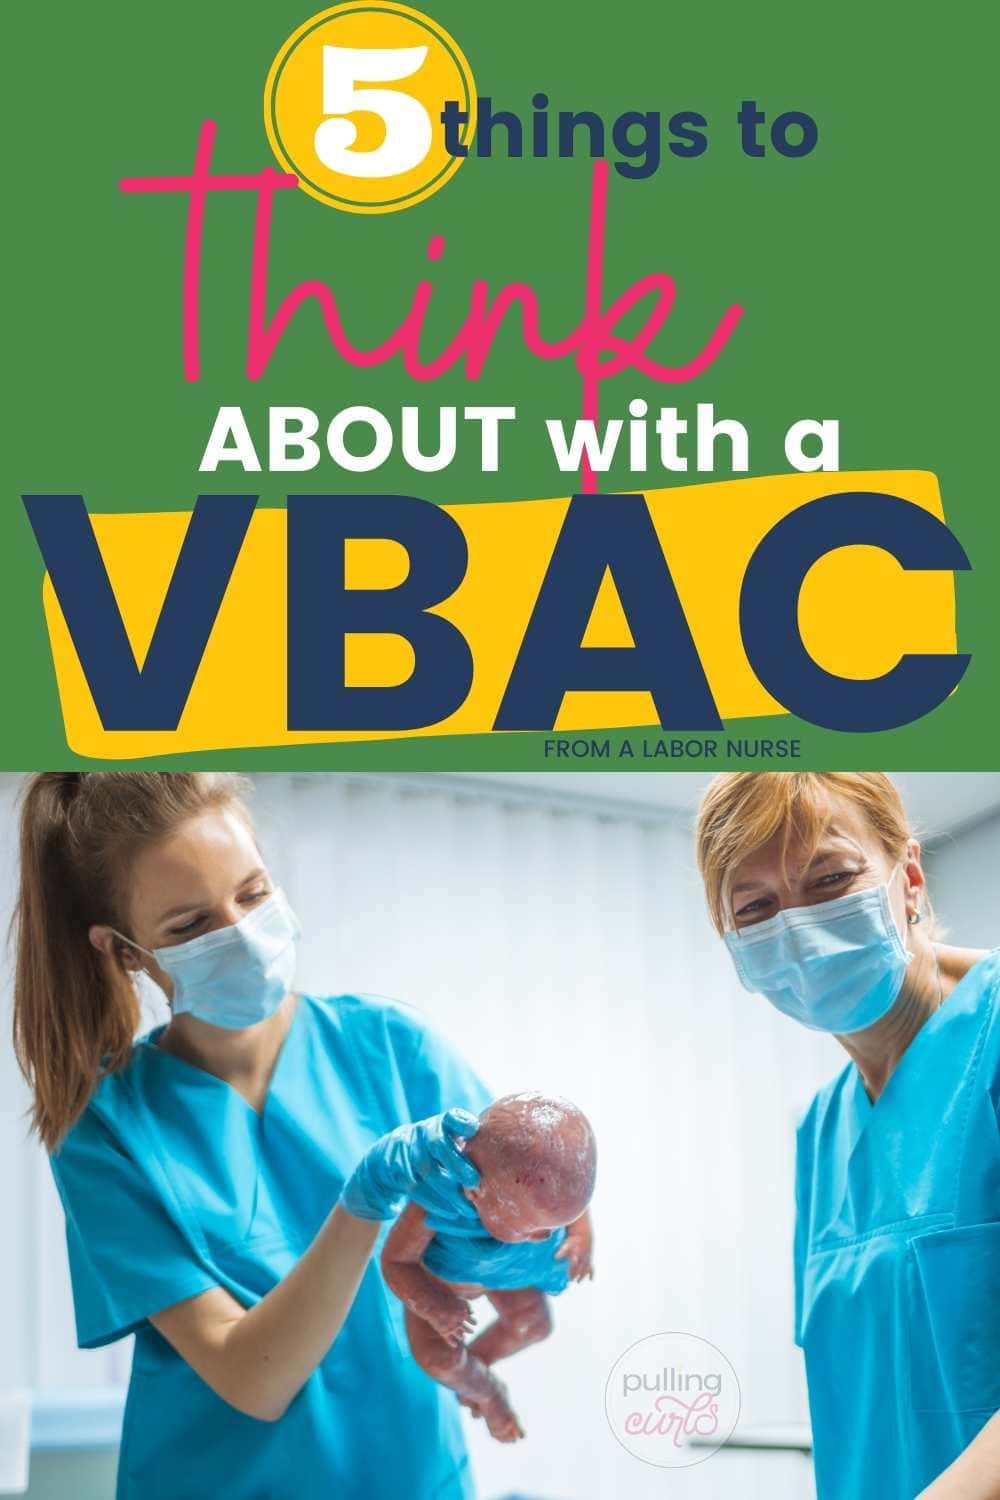 First off, they're actually called TOLAC (Trial Of Labor After Cesarean).  But, no one wants to be a Toe-lac.  They'd rather be a VBAC (a VBAC would actually be a sucessful vaginal birth after cesarean section).  There, feel educated? via @pullingcurls